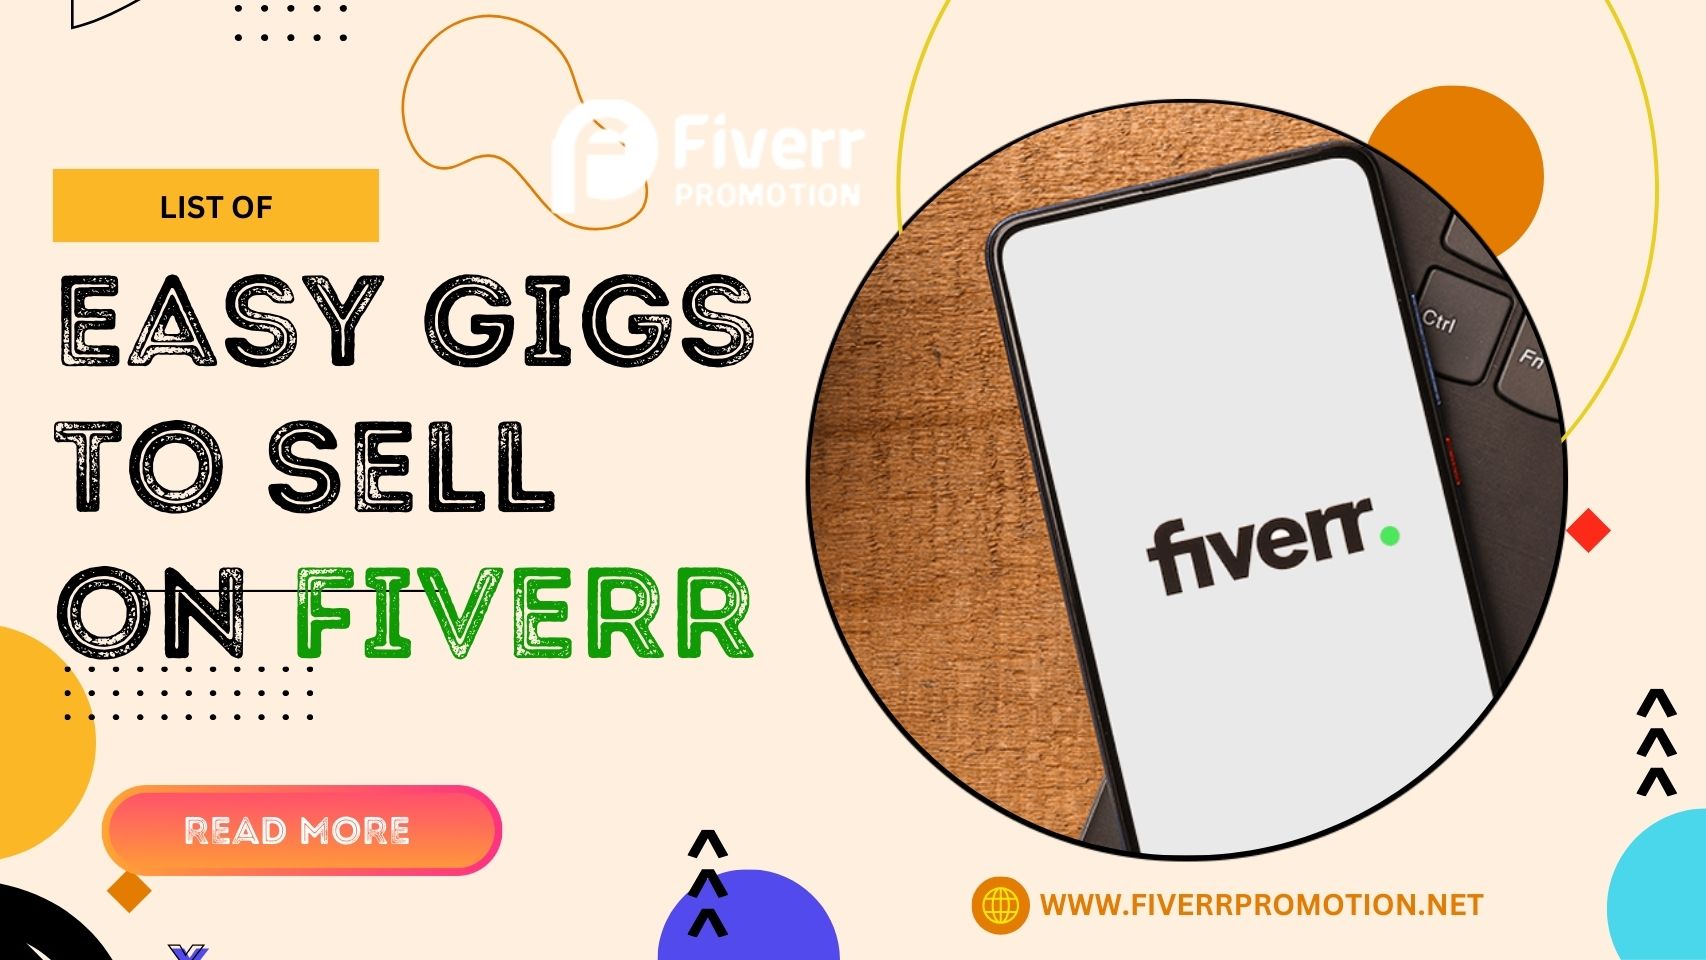  List of Easy Gigs to Sell on Fiverr